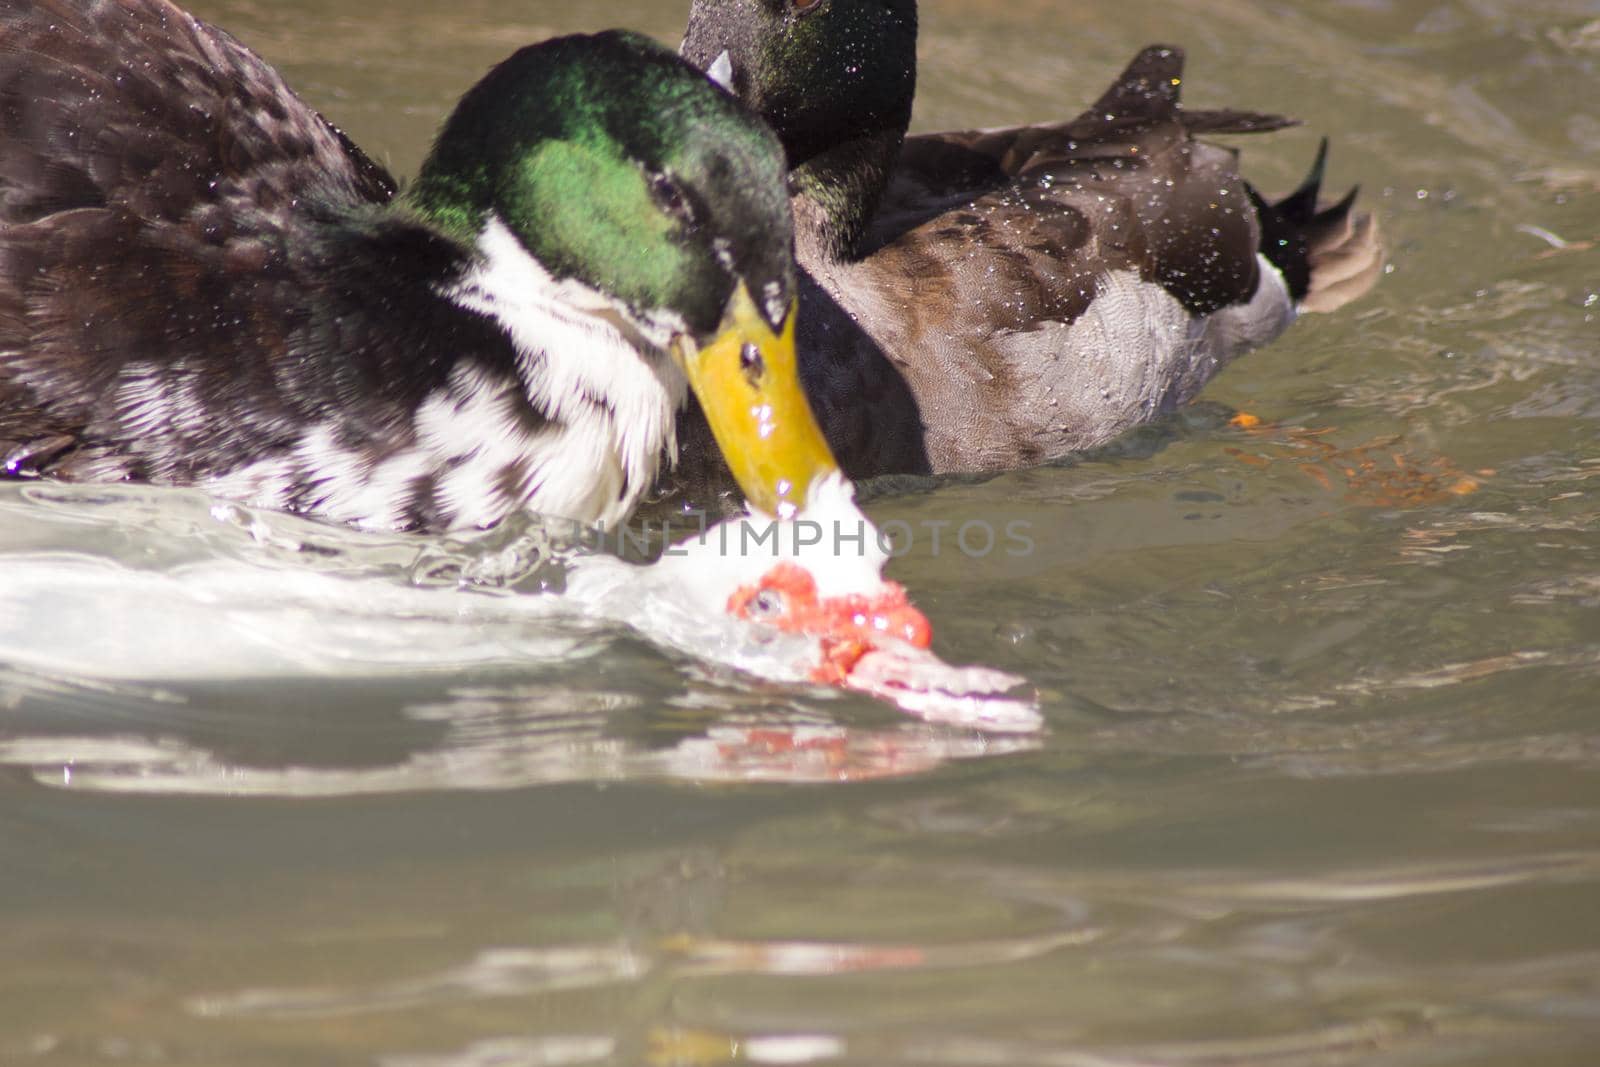 Duck living in an artificial city pond. No people